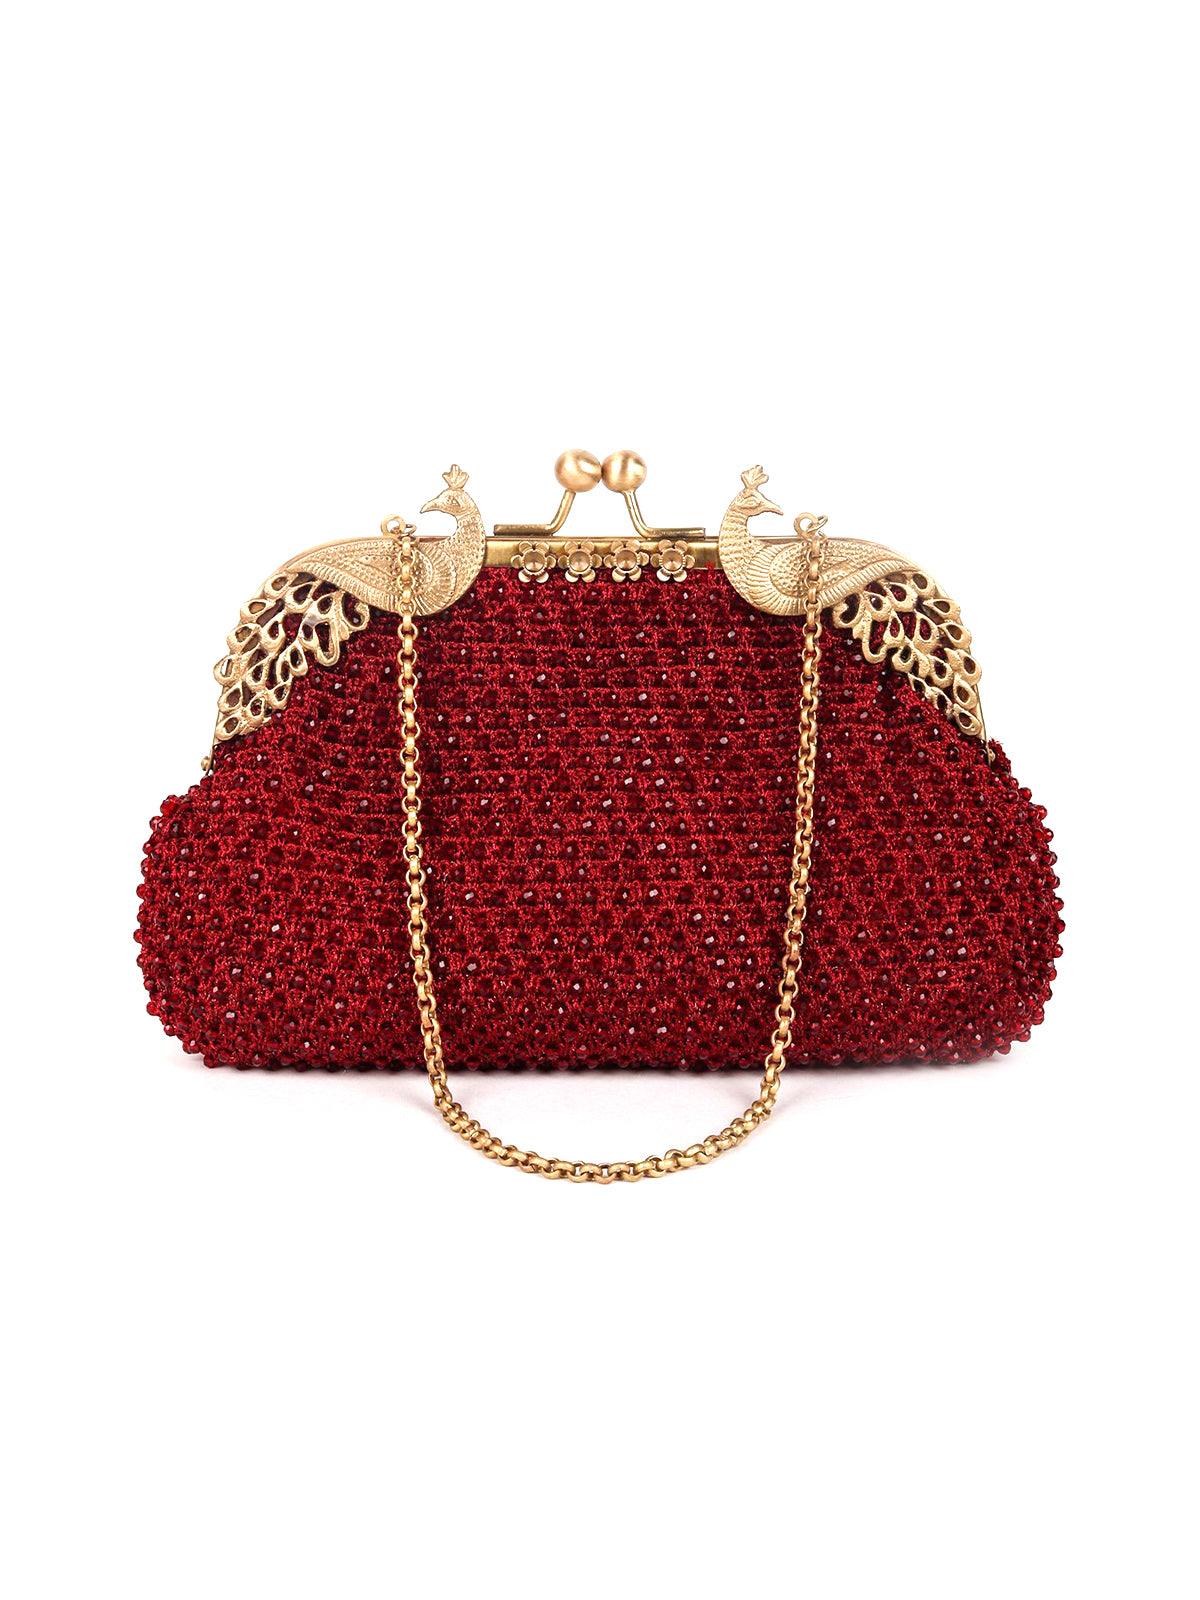 peacock curved shinny maroon clutchpurse odette